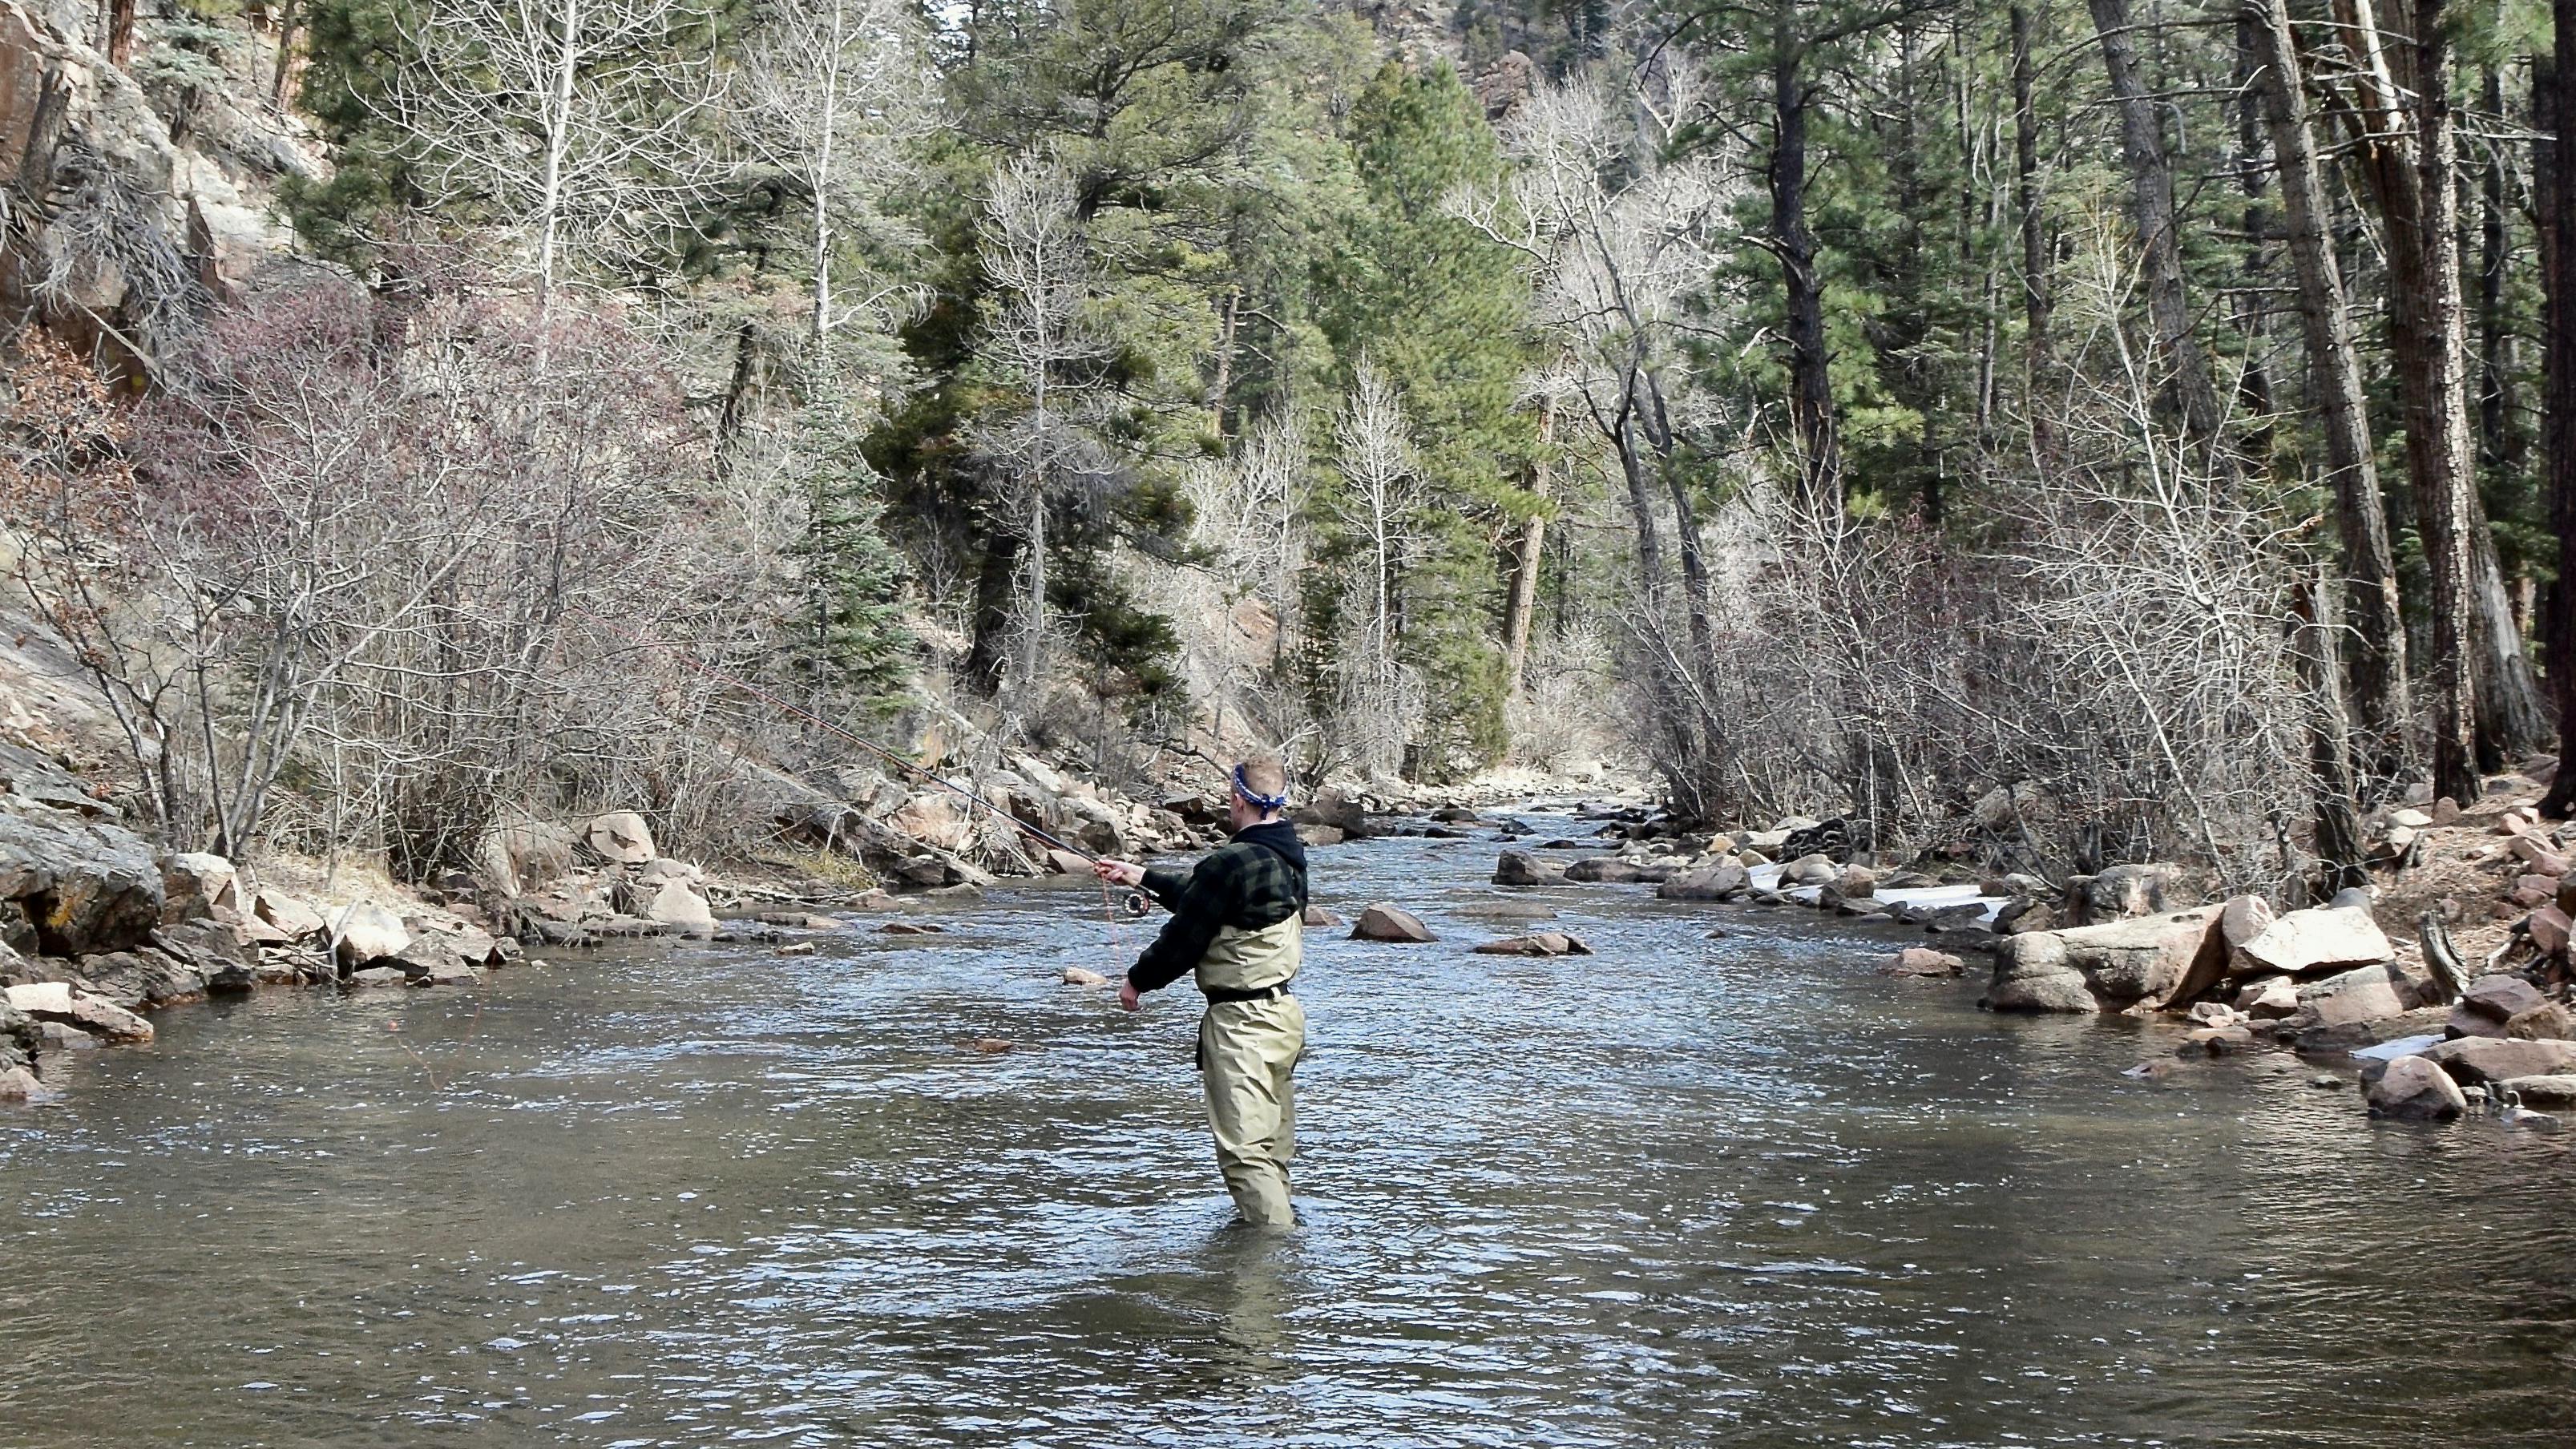 A man flyfishes in the middle of the river while wearing waders. The banks are sloped and rocky. 